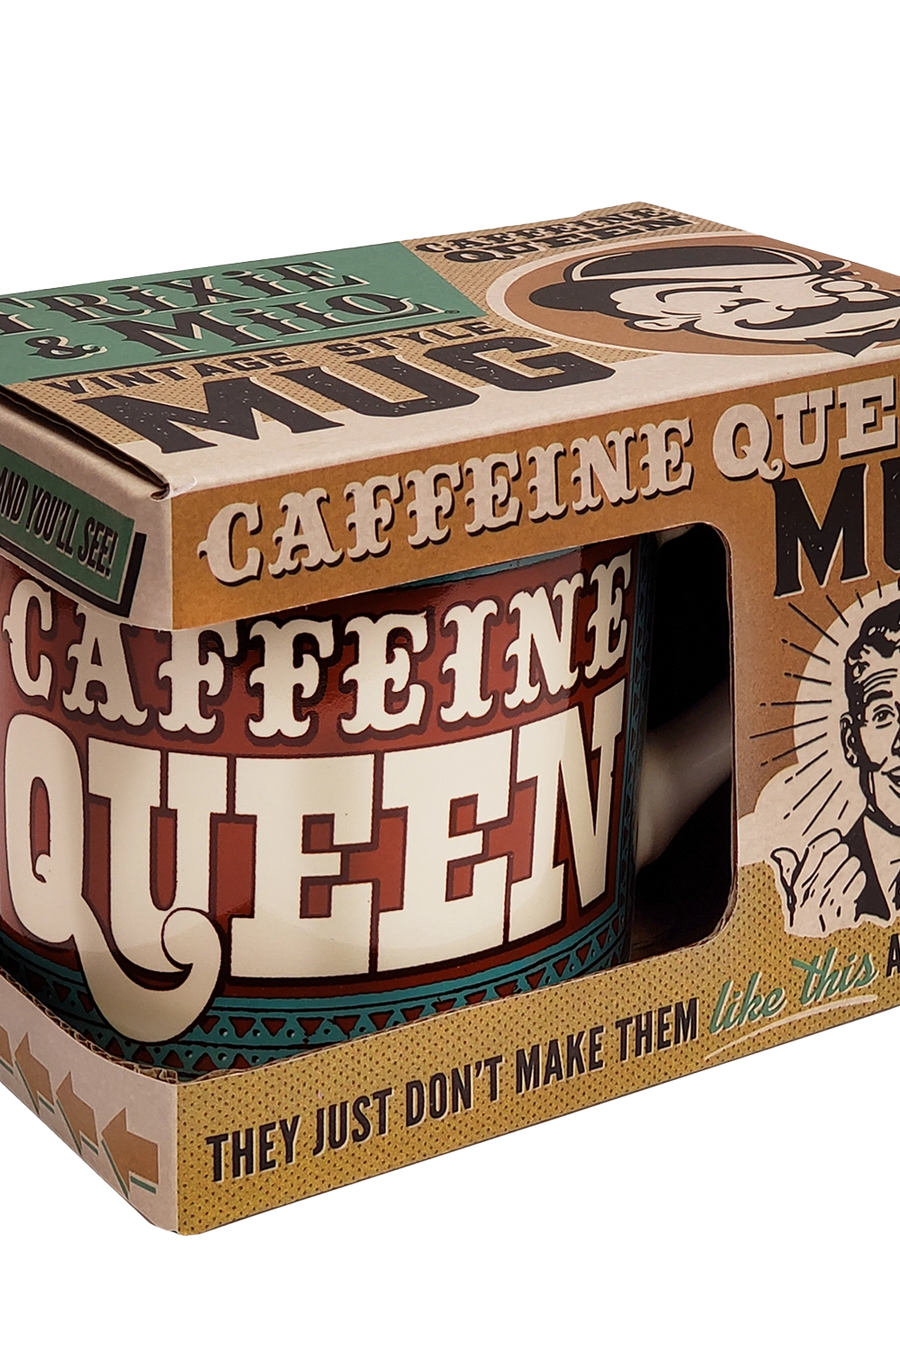 "Caffeine Queen" Ceramic tea and coffee mug Start everyday with confidence. Drinking glass, solid ceramic mug crafted for durability and aesthetic appeal. in Gift Box